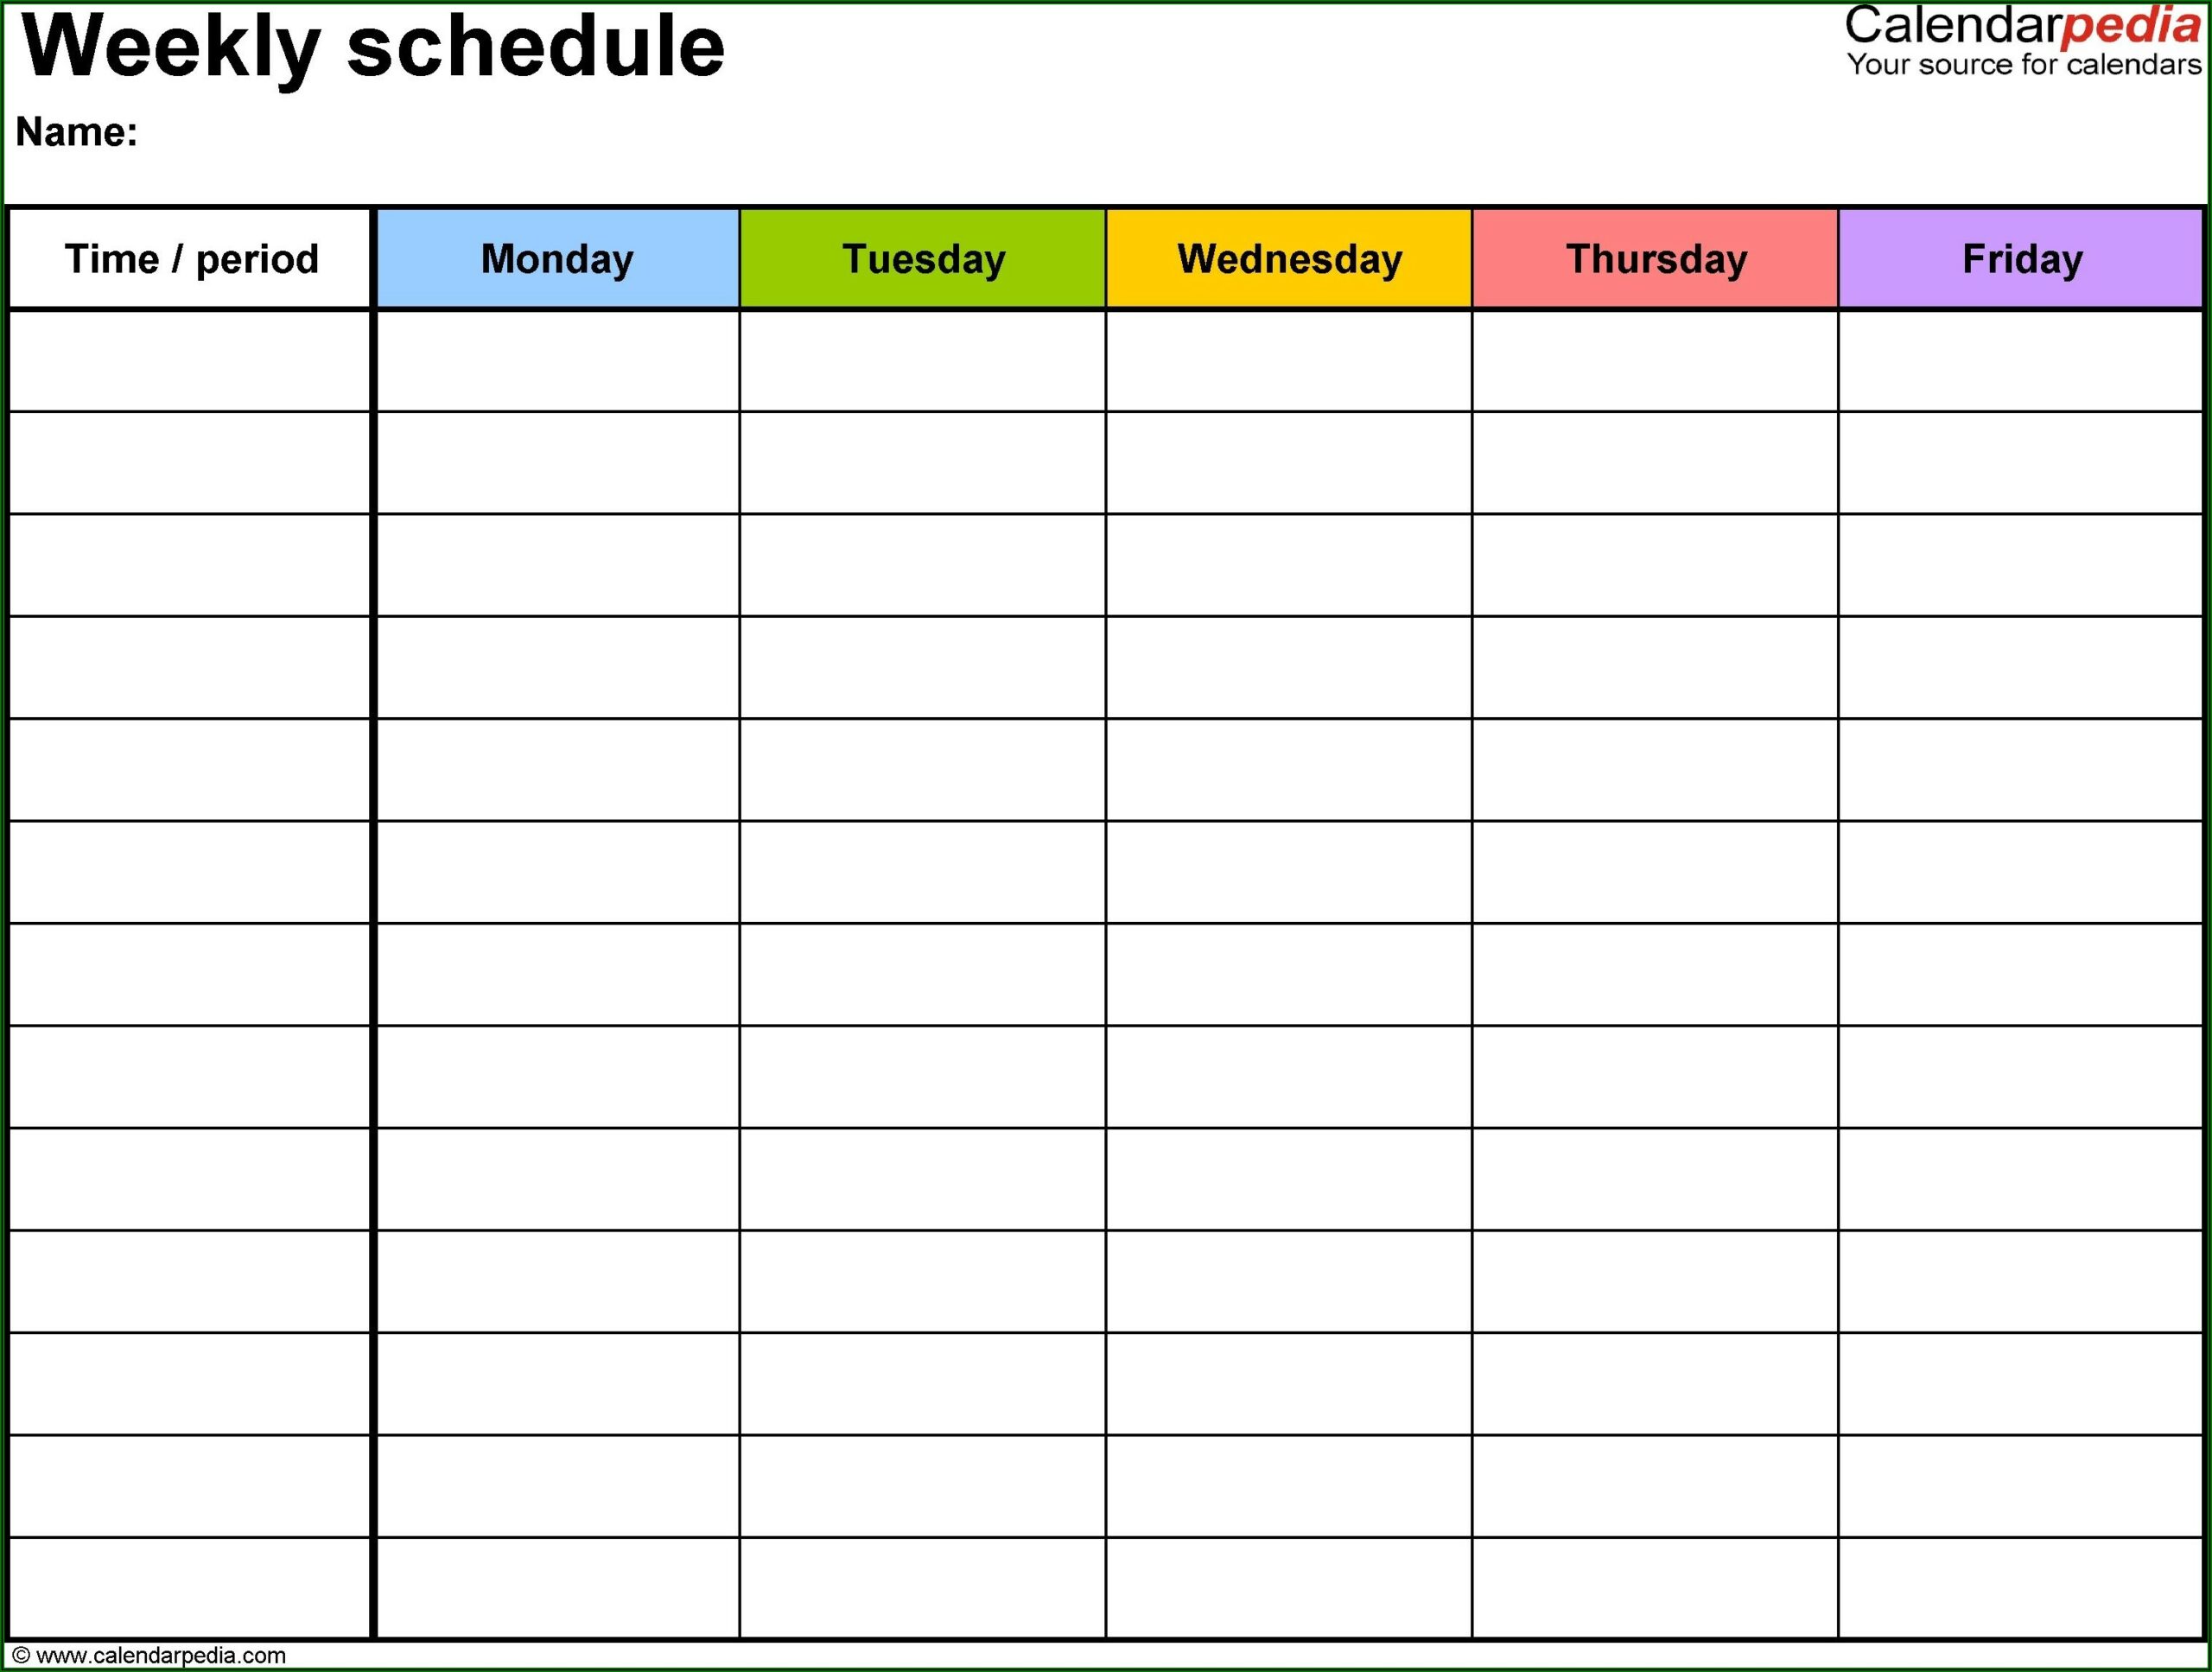 Weekly Calendar Template With Times Excel